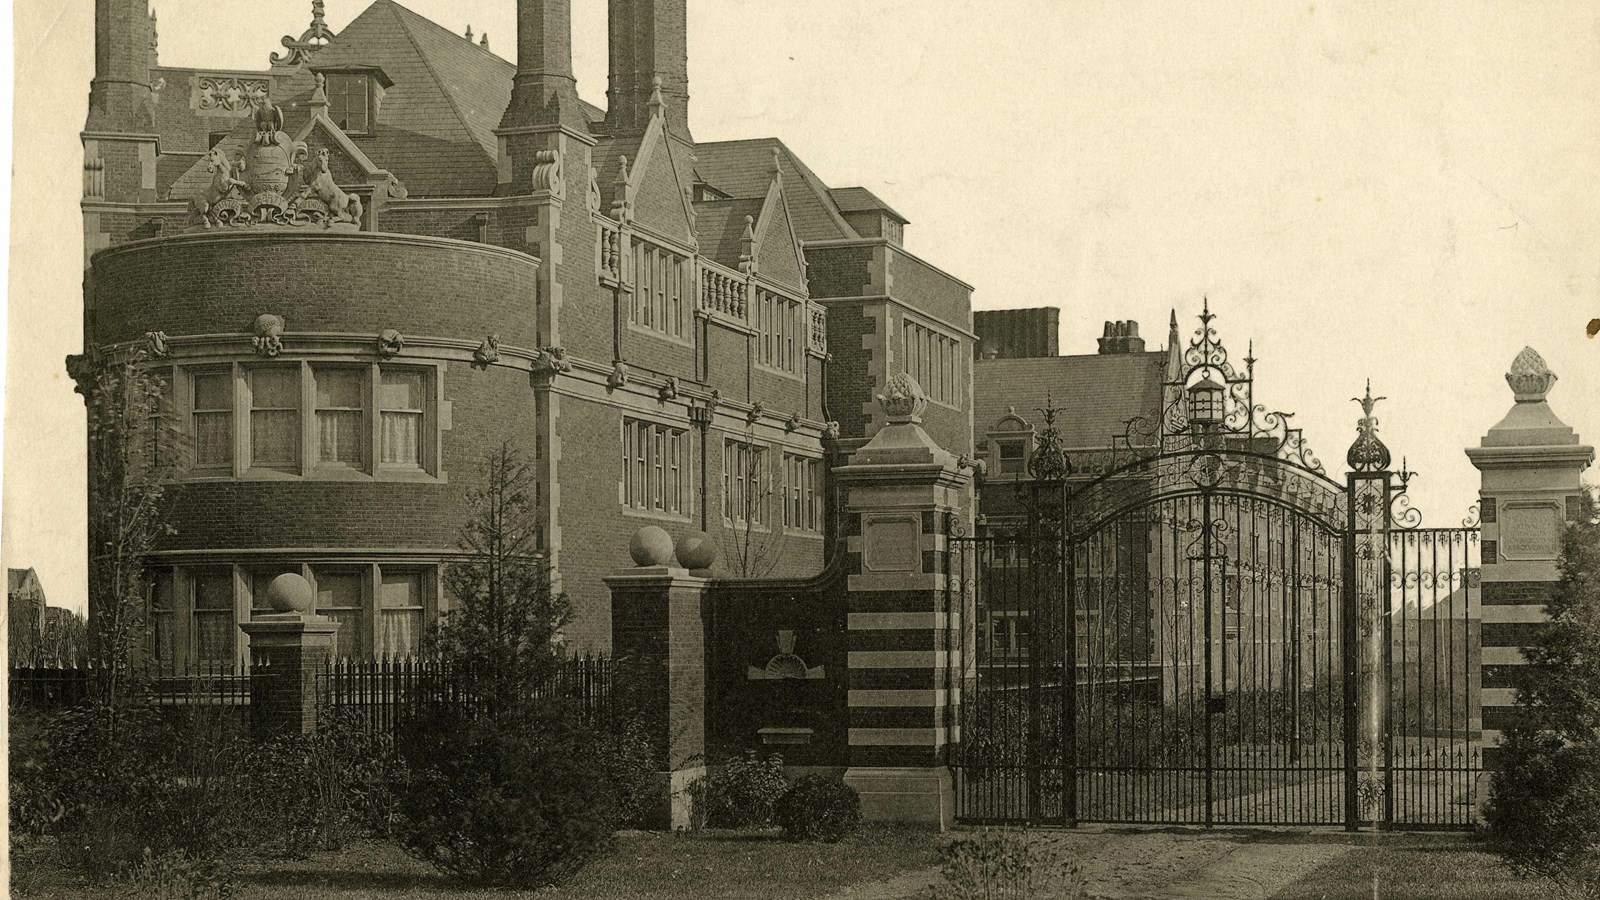 Black and white of large brick building with flat grassy area in front with gate to access building